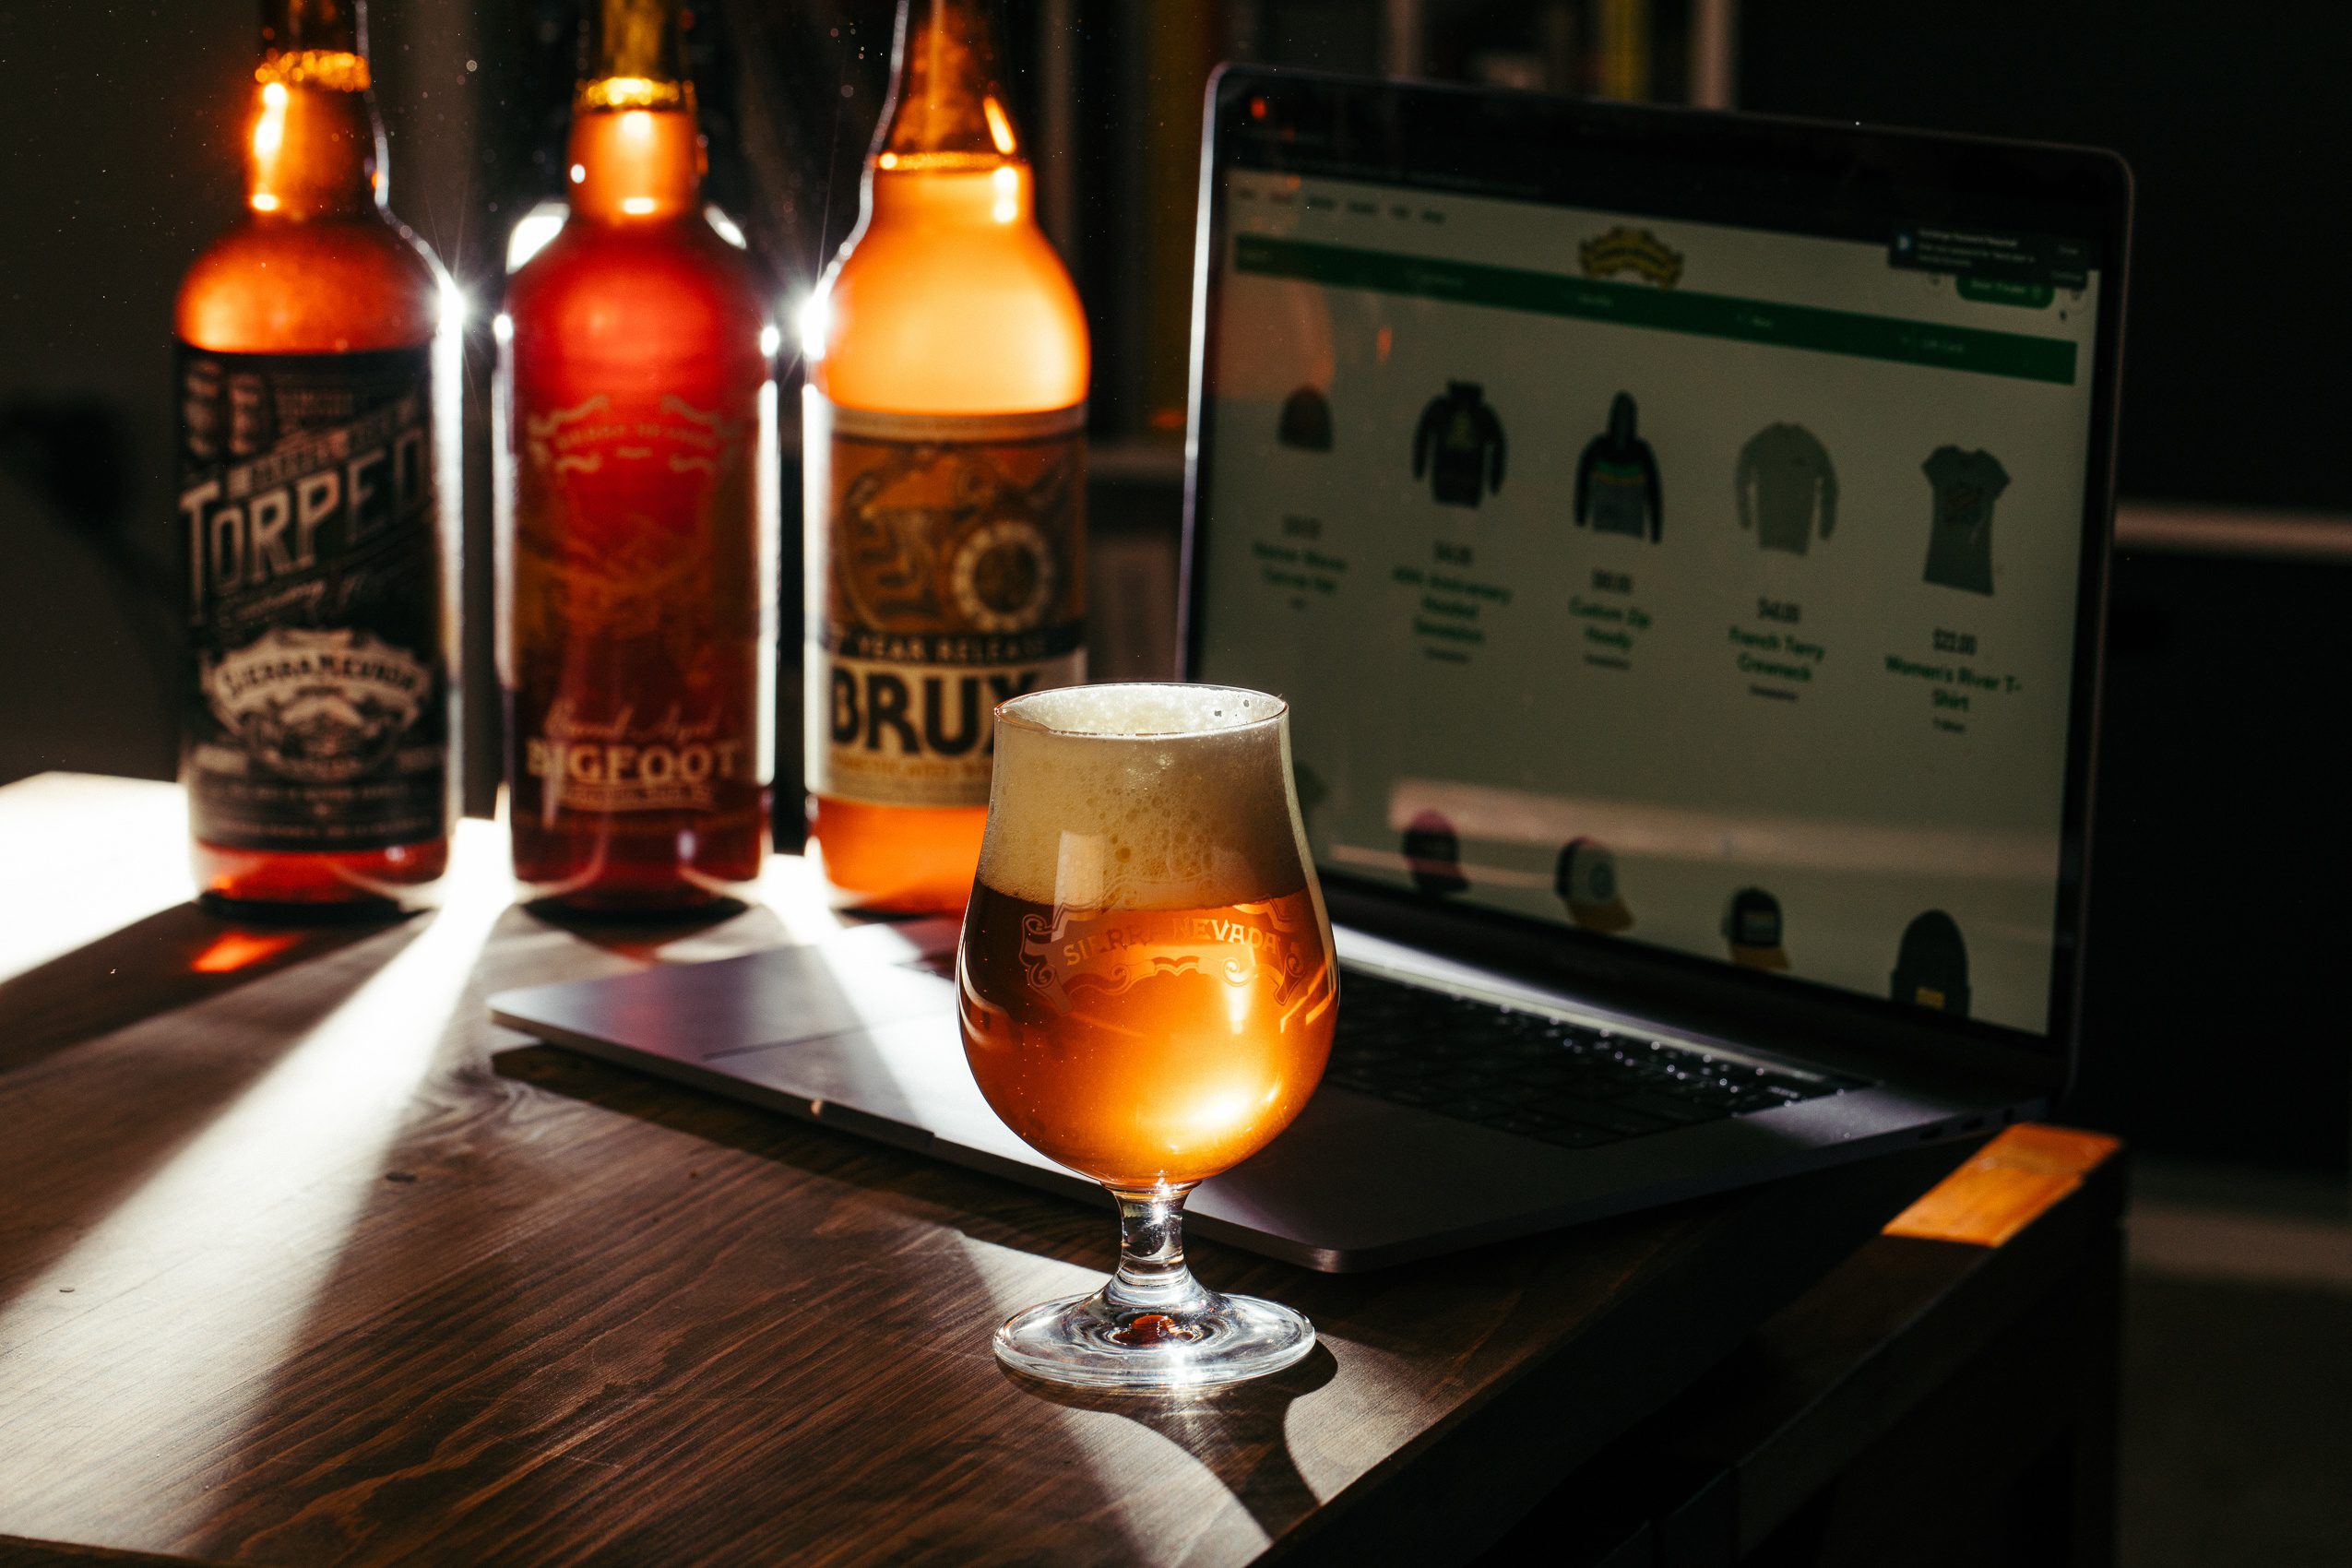 Sun rays shining through several bottles of Sierra Nevada Brewing Company beer and a laptop computer